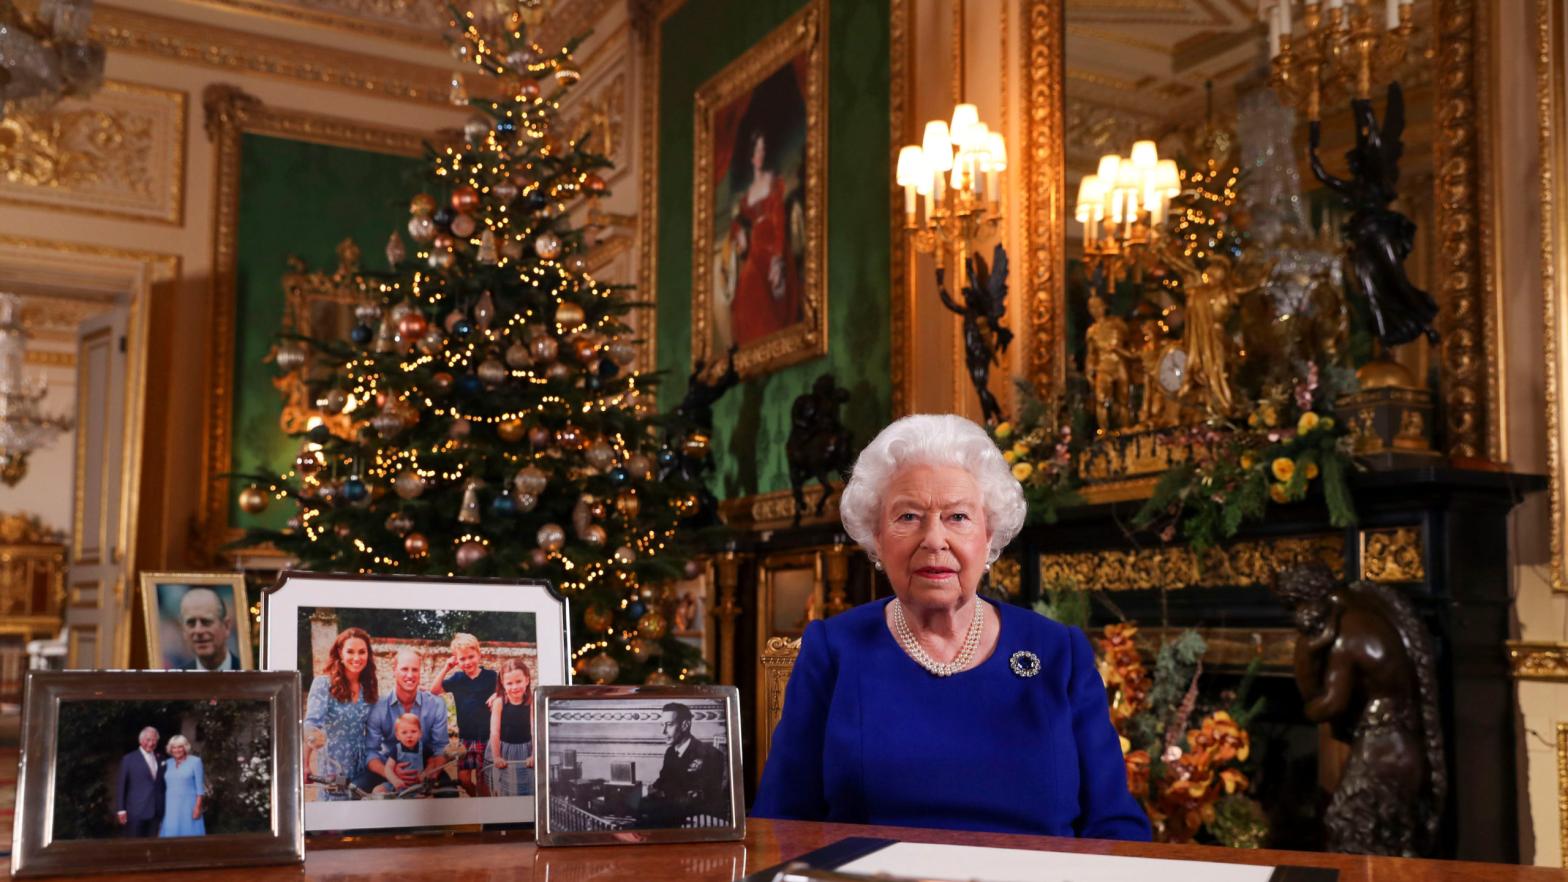 In this undated photo, Queen Elizabeth II records her annual Christmas broadcast in Windsor Castle, Berkshire, England.  (Photo: Steve Parsons - WPA Pool, Getty Images)